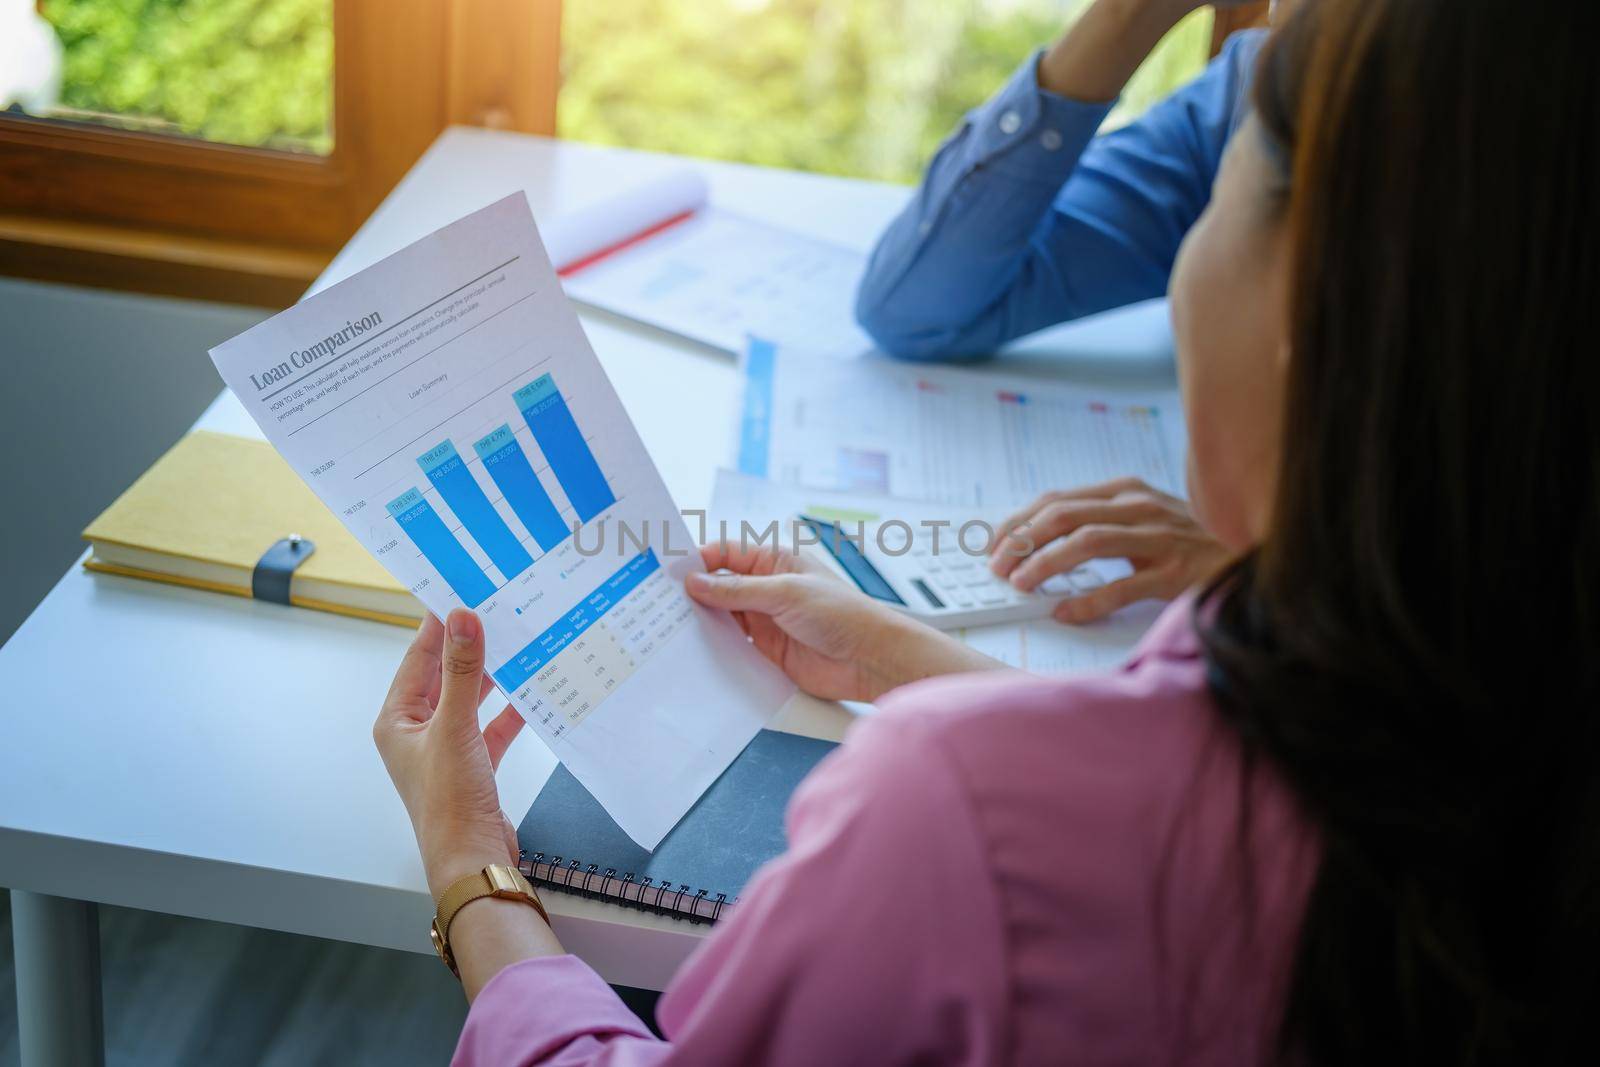 Negotiation, Analysis, Discussion, Portrait of an Asian young economist and marketer pointing to a financial data sheet to plan investments to prevent risks and losses for the company